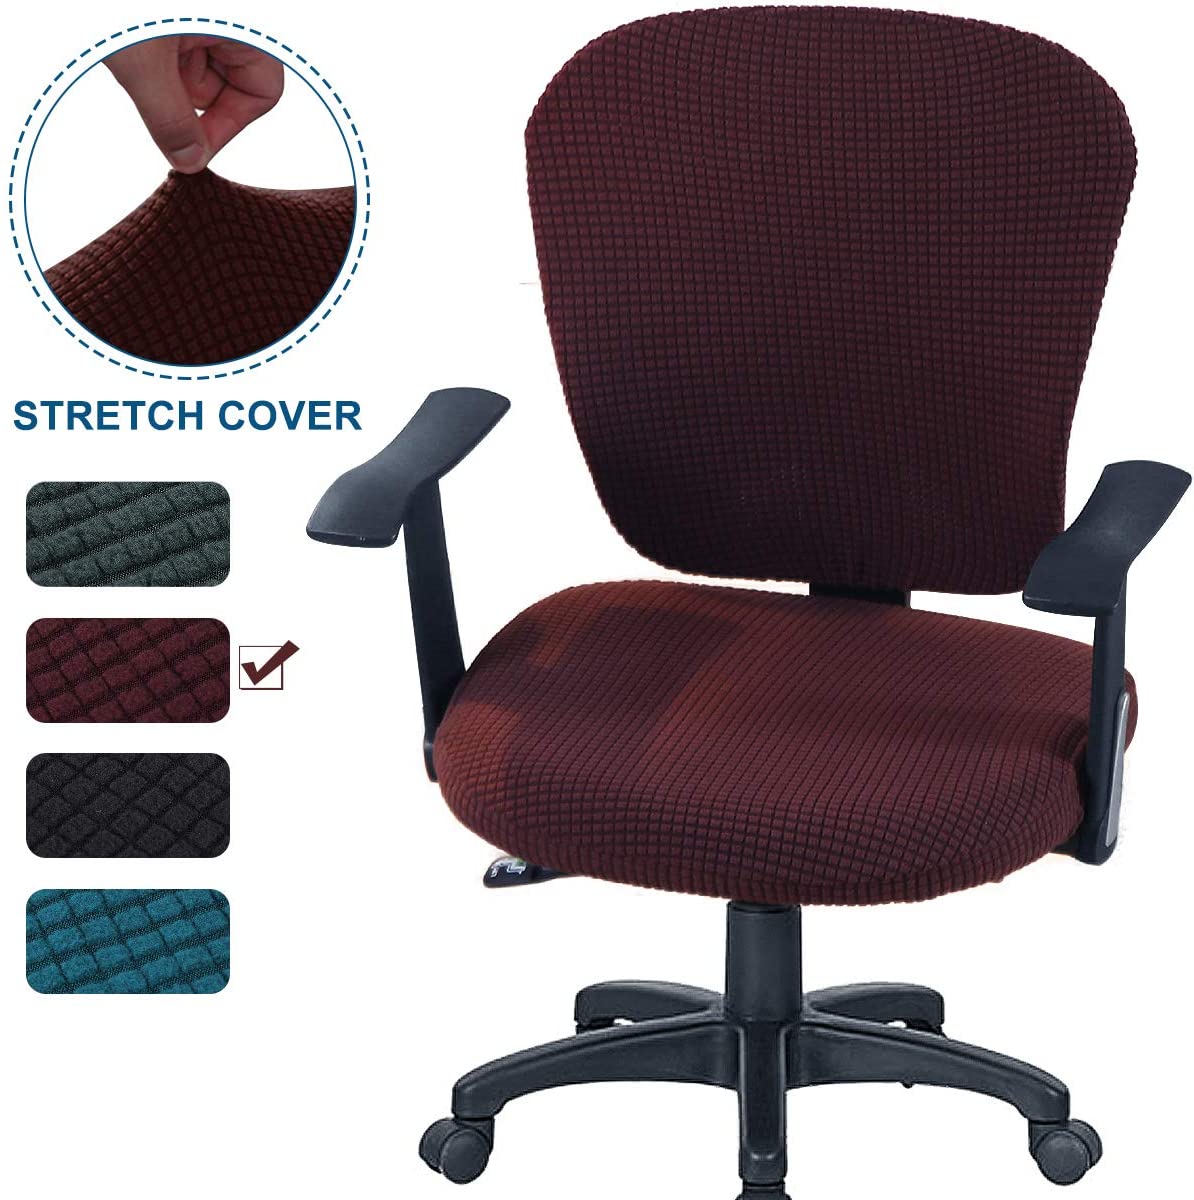 Office Chair Cover 2 Piece Stretchable Computer Office Chair Covers Universal Chair Seat Covers Stretch Rotating Chair Slipcovers Washable Spandex Desk Chair Cover Protectors - image 1 of 7